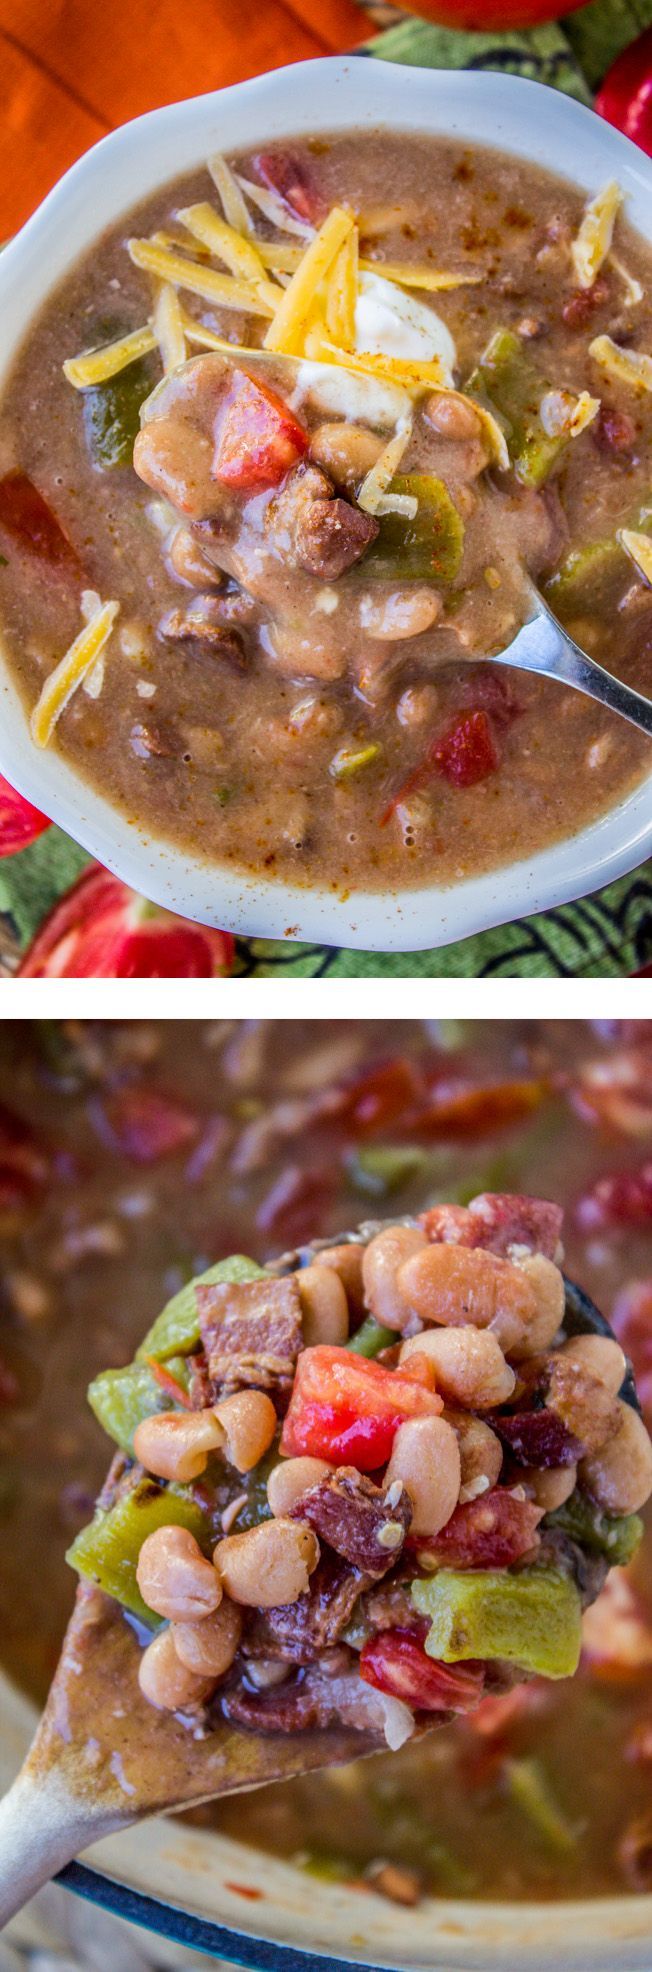 Cowboy Pinto Bean Soup (Slow Cooker) from The Food Charlatan // Frijoles Charros is an old family favorite. Pinto beans, roasted